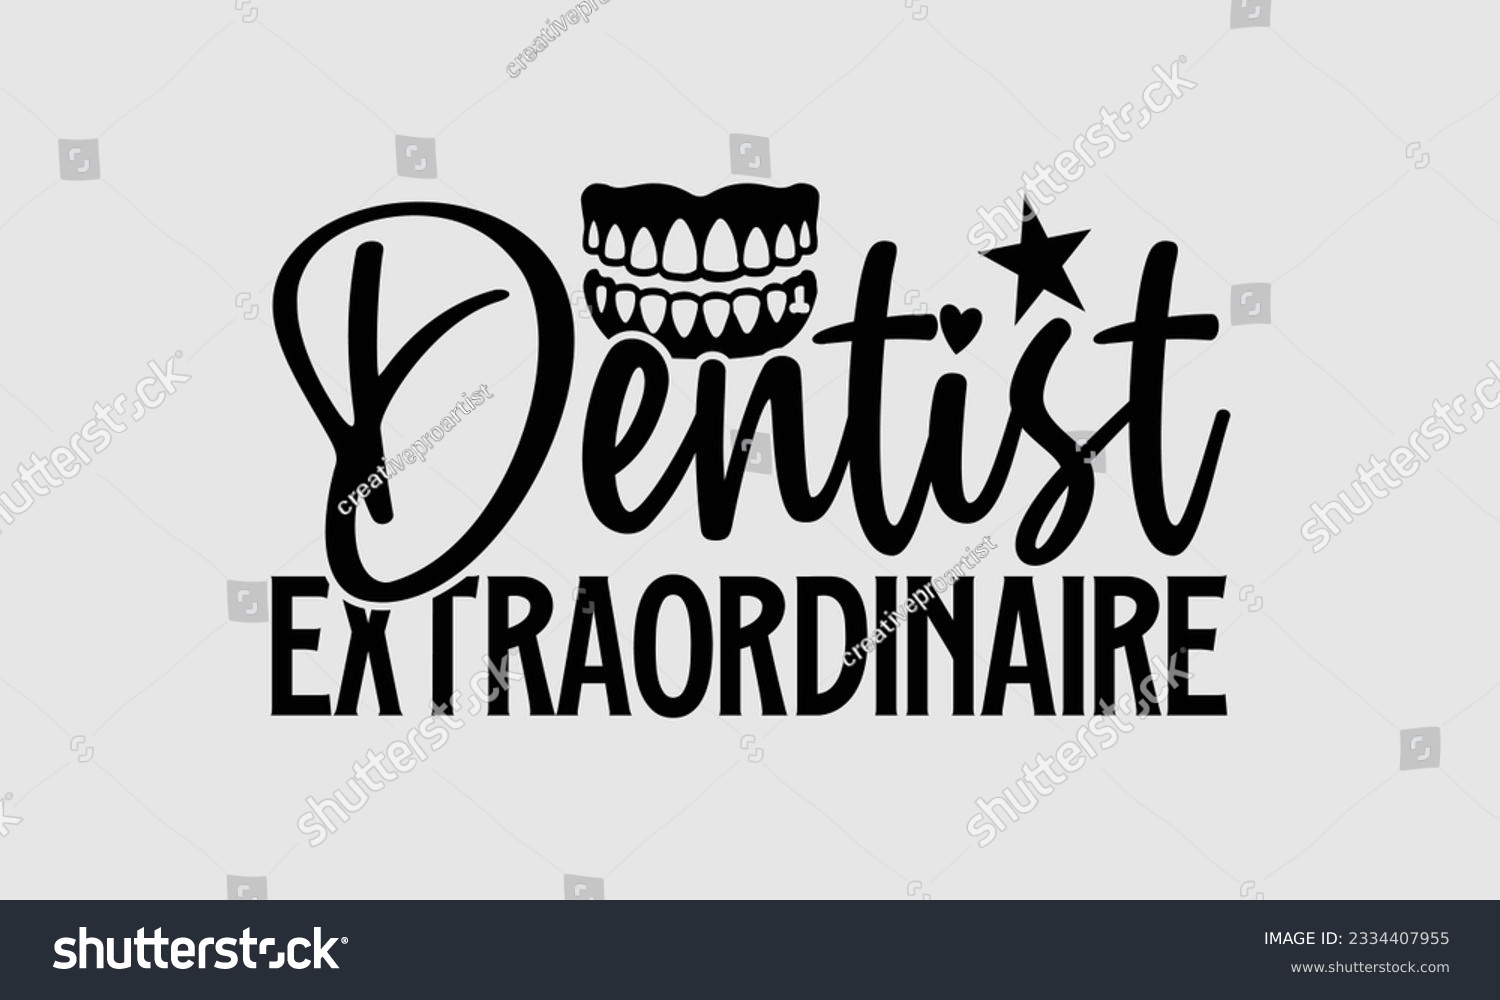 SVG of Dentist Extraordinaire- Dentist t-shirt design, Calligraphy graphic design, eps, svg Files for Cutting, greeting card template with typography text white background. svg